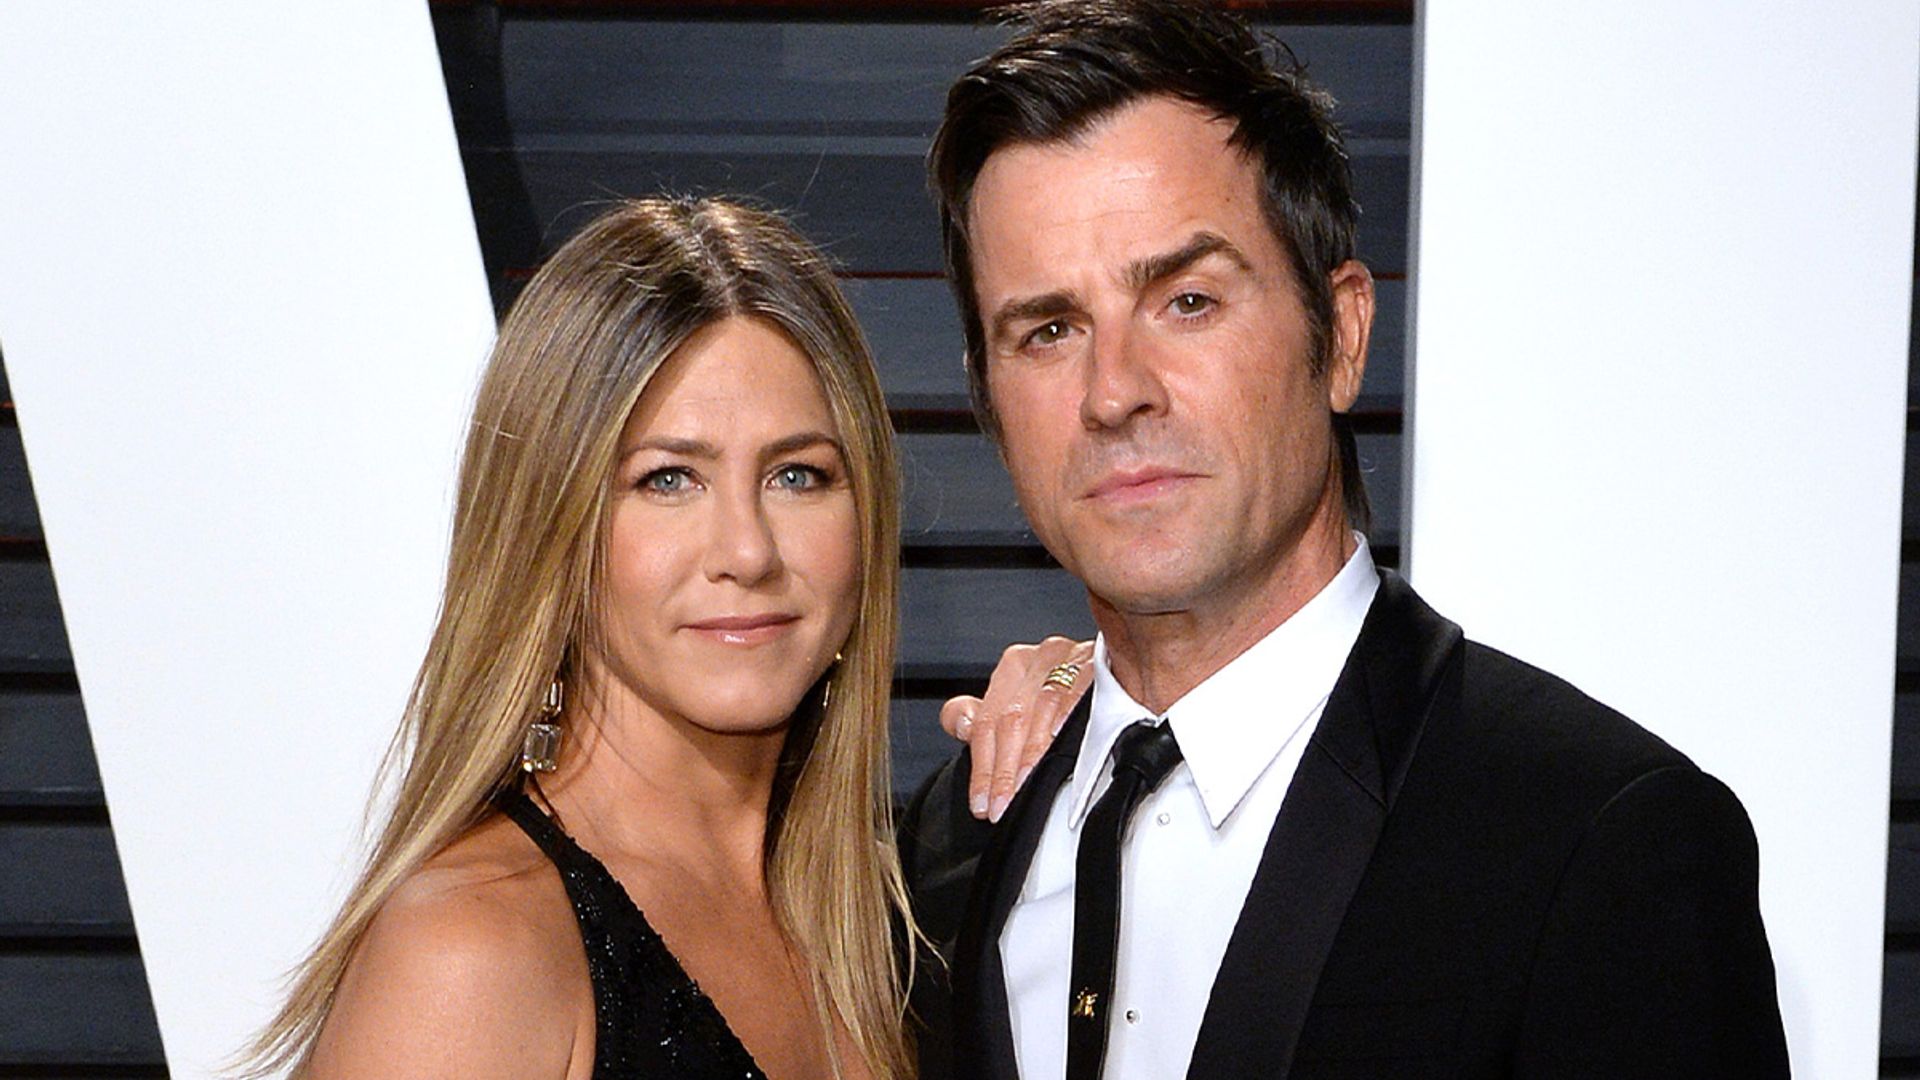 Why Jennifer Aniston and Justin Theroux's two-year marriage ended